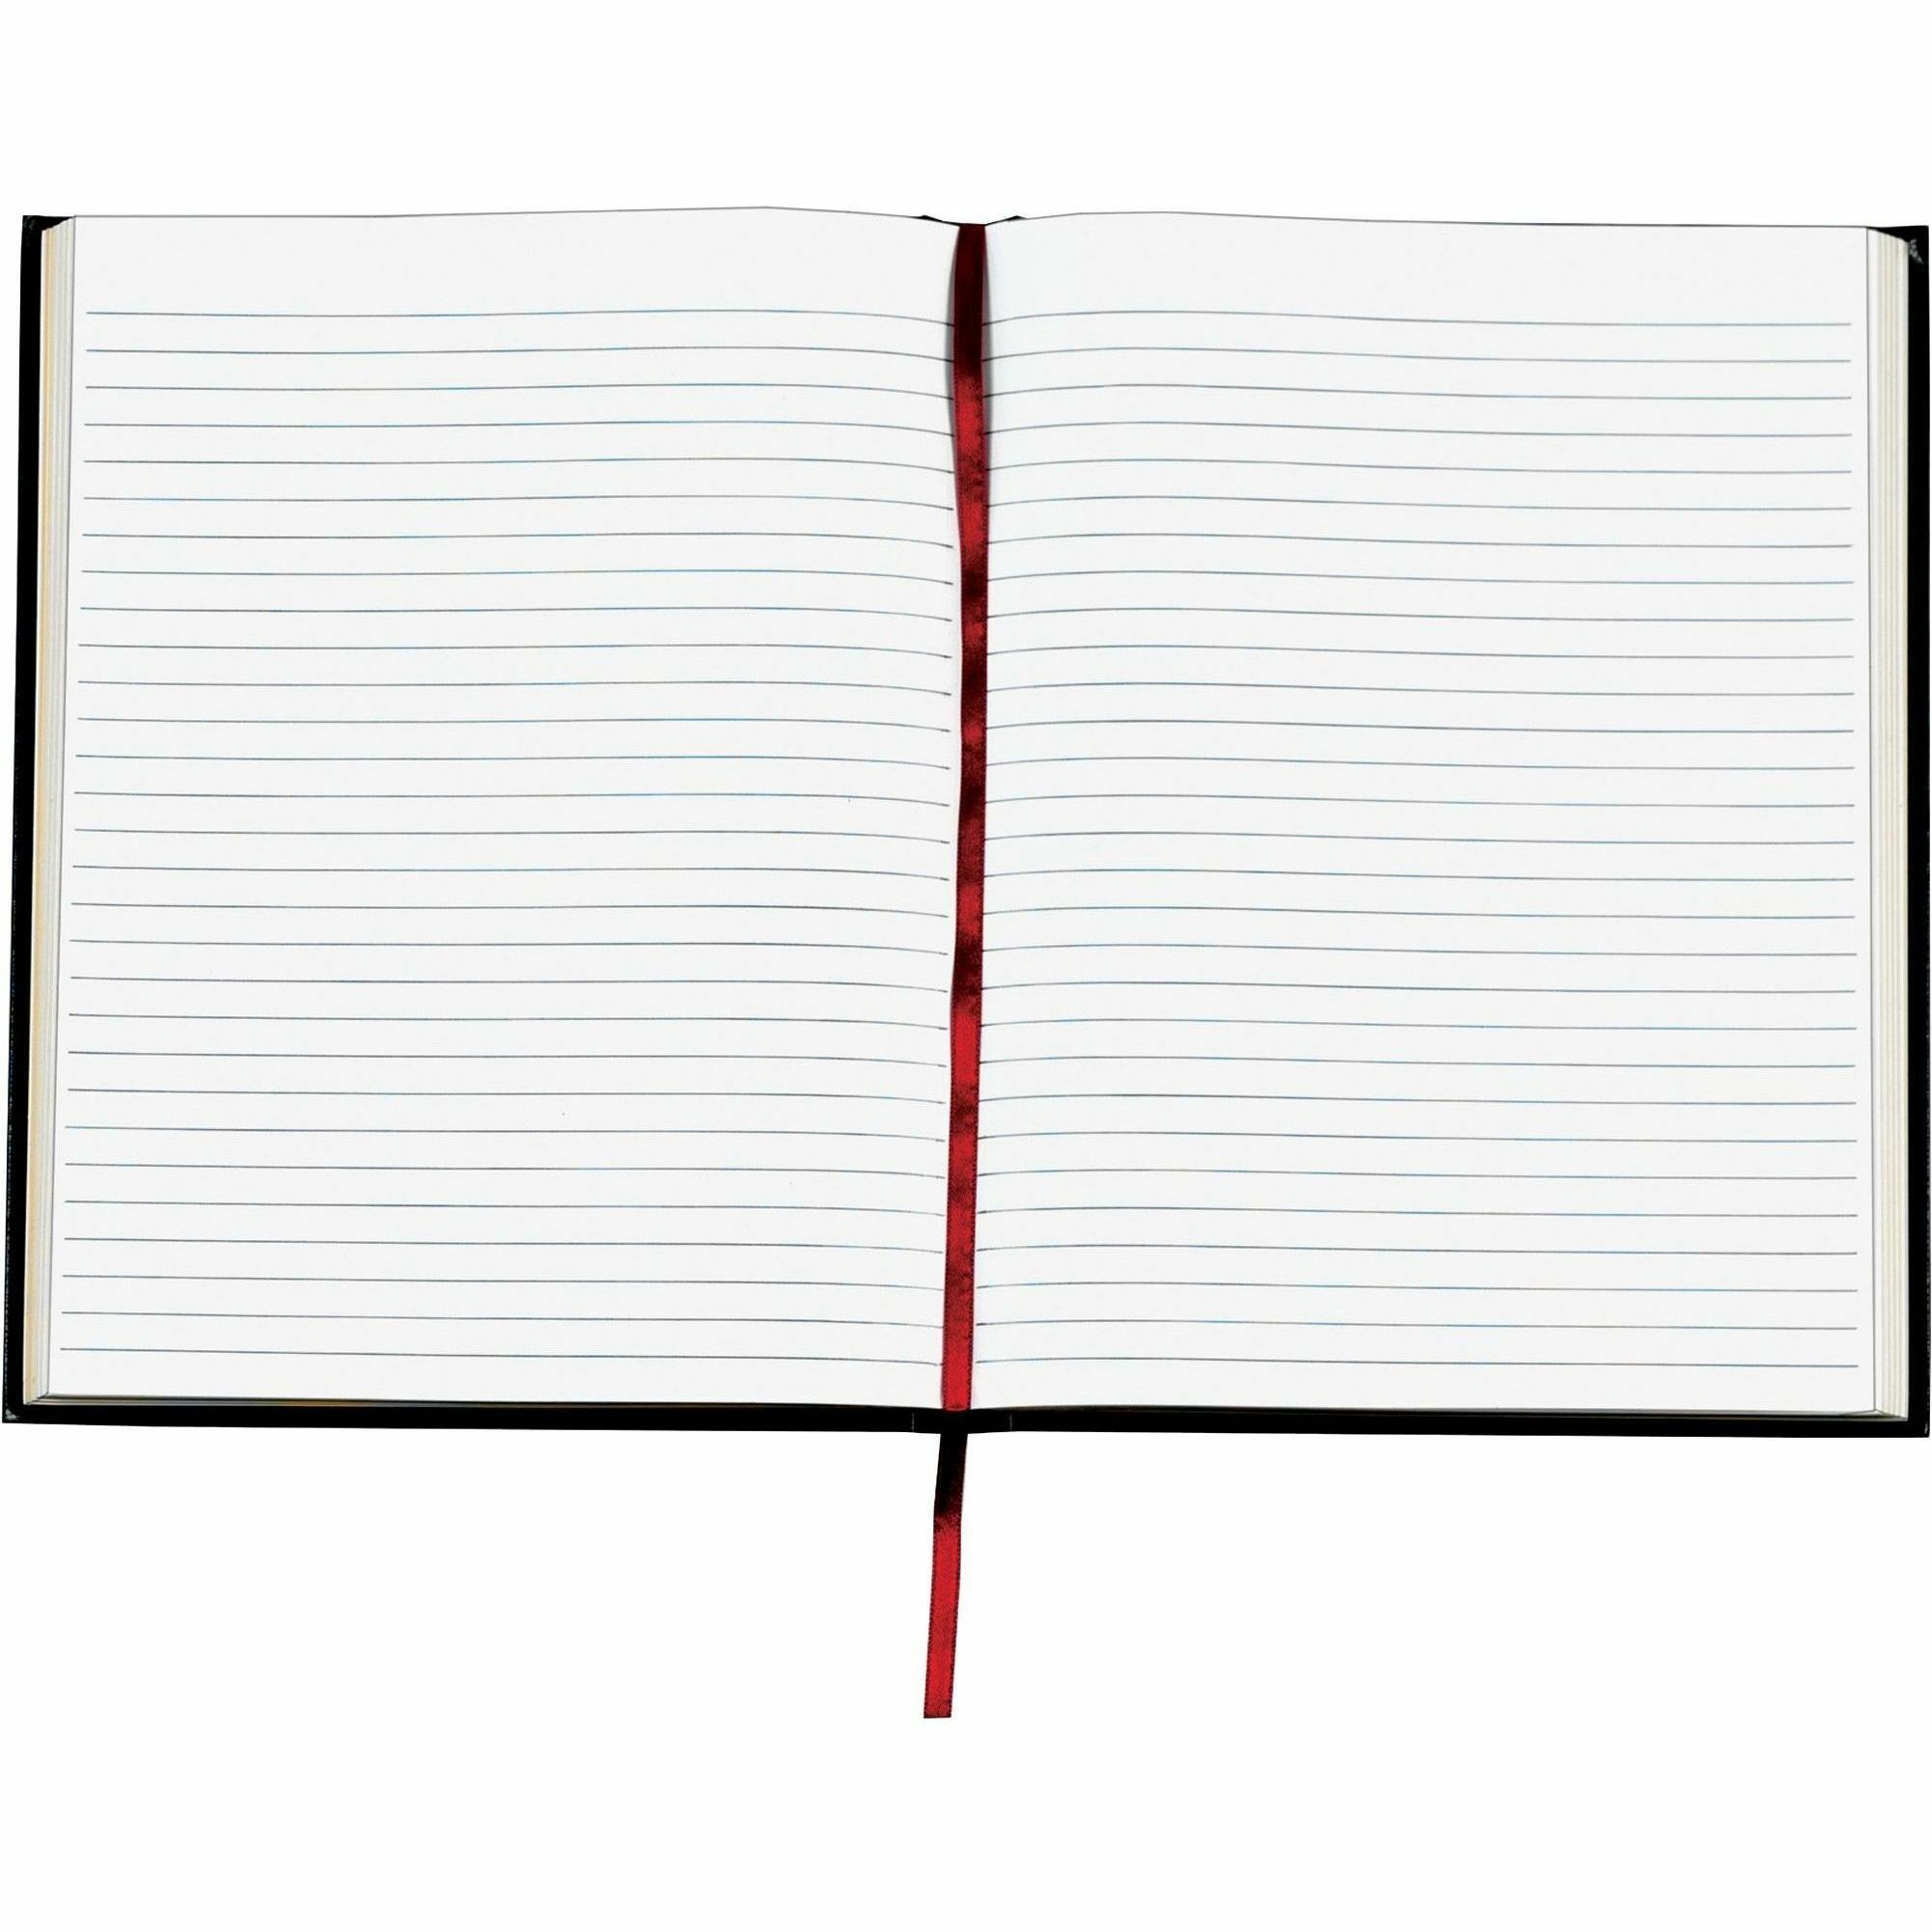 Red Ruled Business Paper, 8.5 x 11